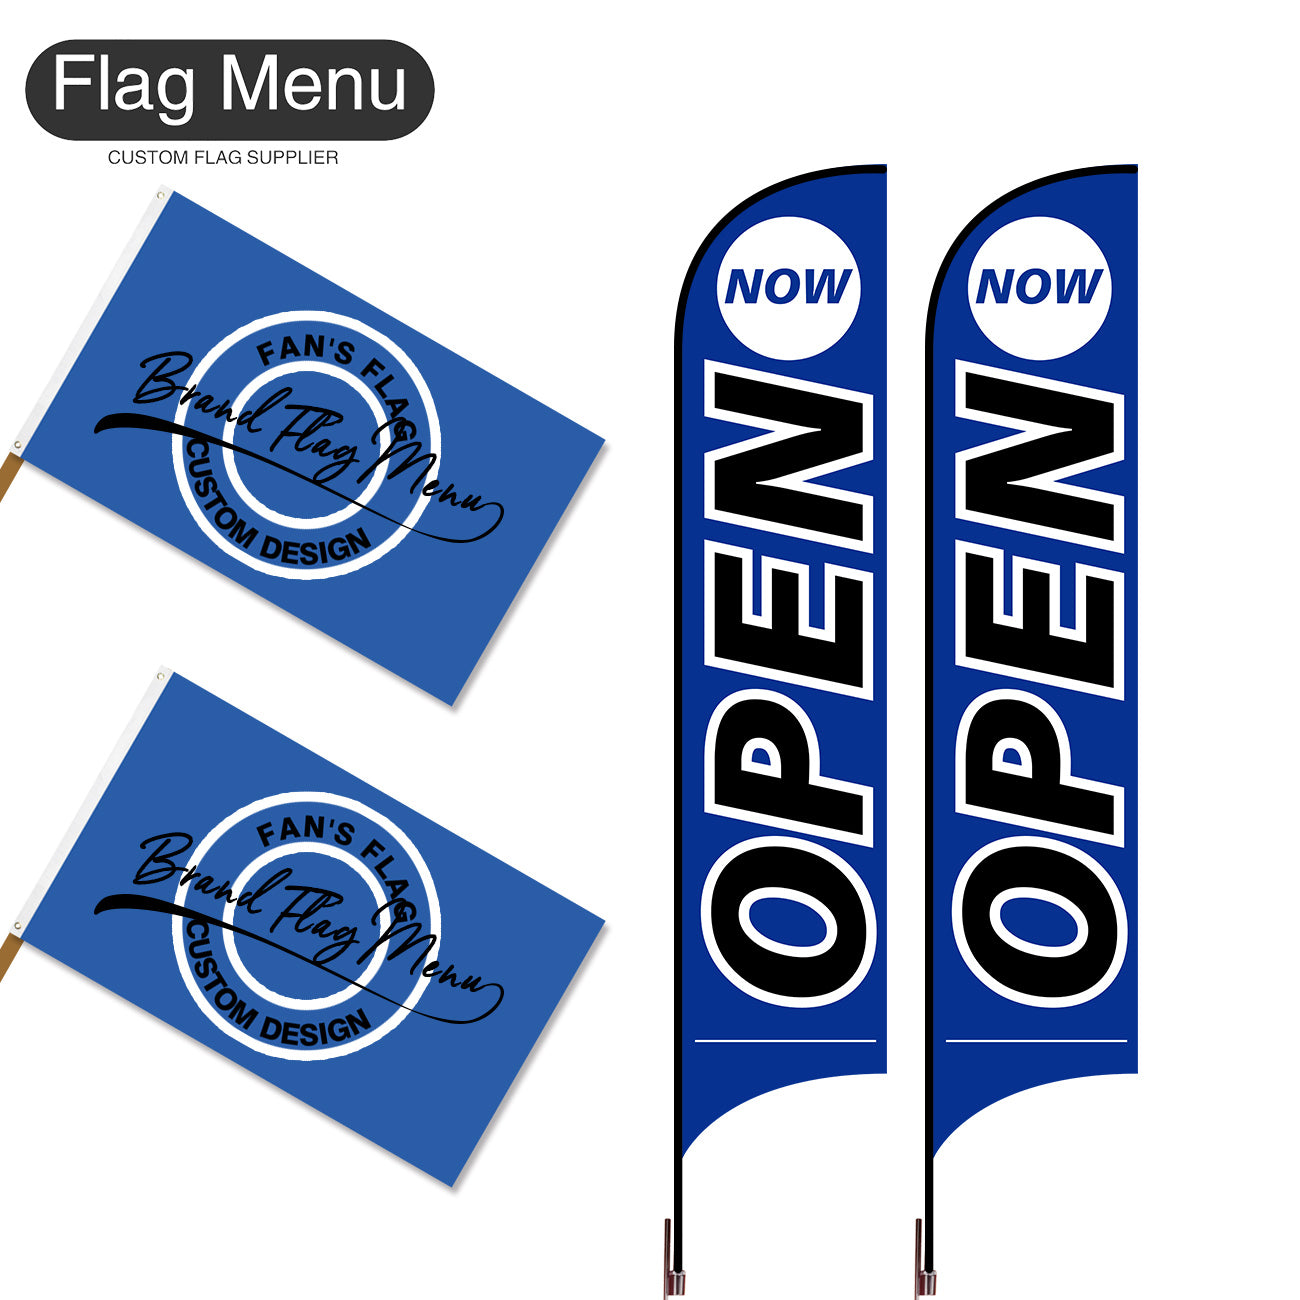 Outdoor Advertising Set - B-Blue B-S - Feather Flag -Double Sided & 3'x5' Regular Flag -Single Sided-Cross & Water Bag-Flag Menu